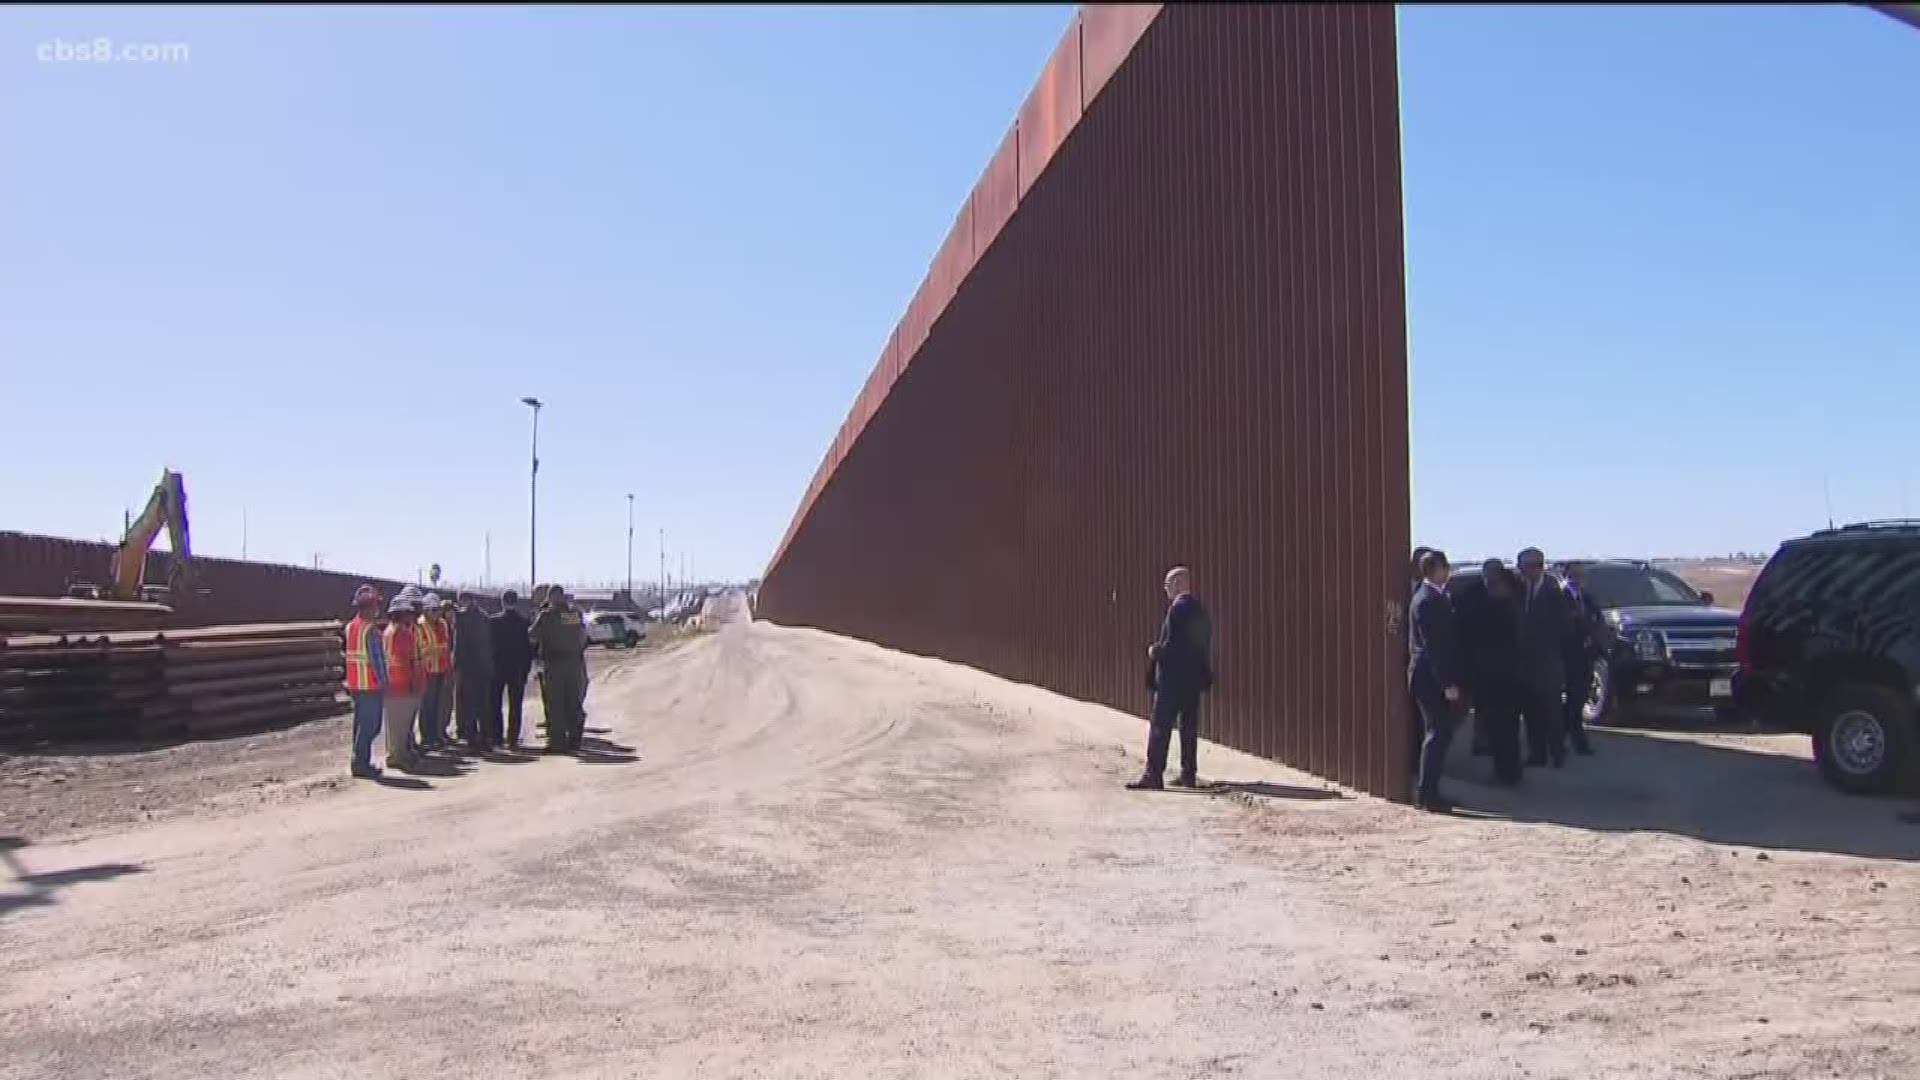 President Trump flew by helicopter to Otay Mesa Wednesday afternoon for a border wall visit after holding a fundraiser in downtown San Diego.